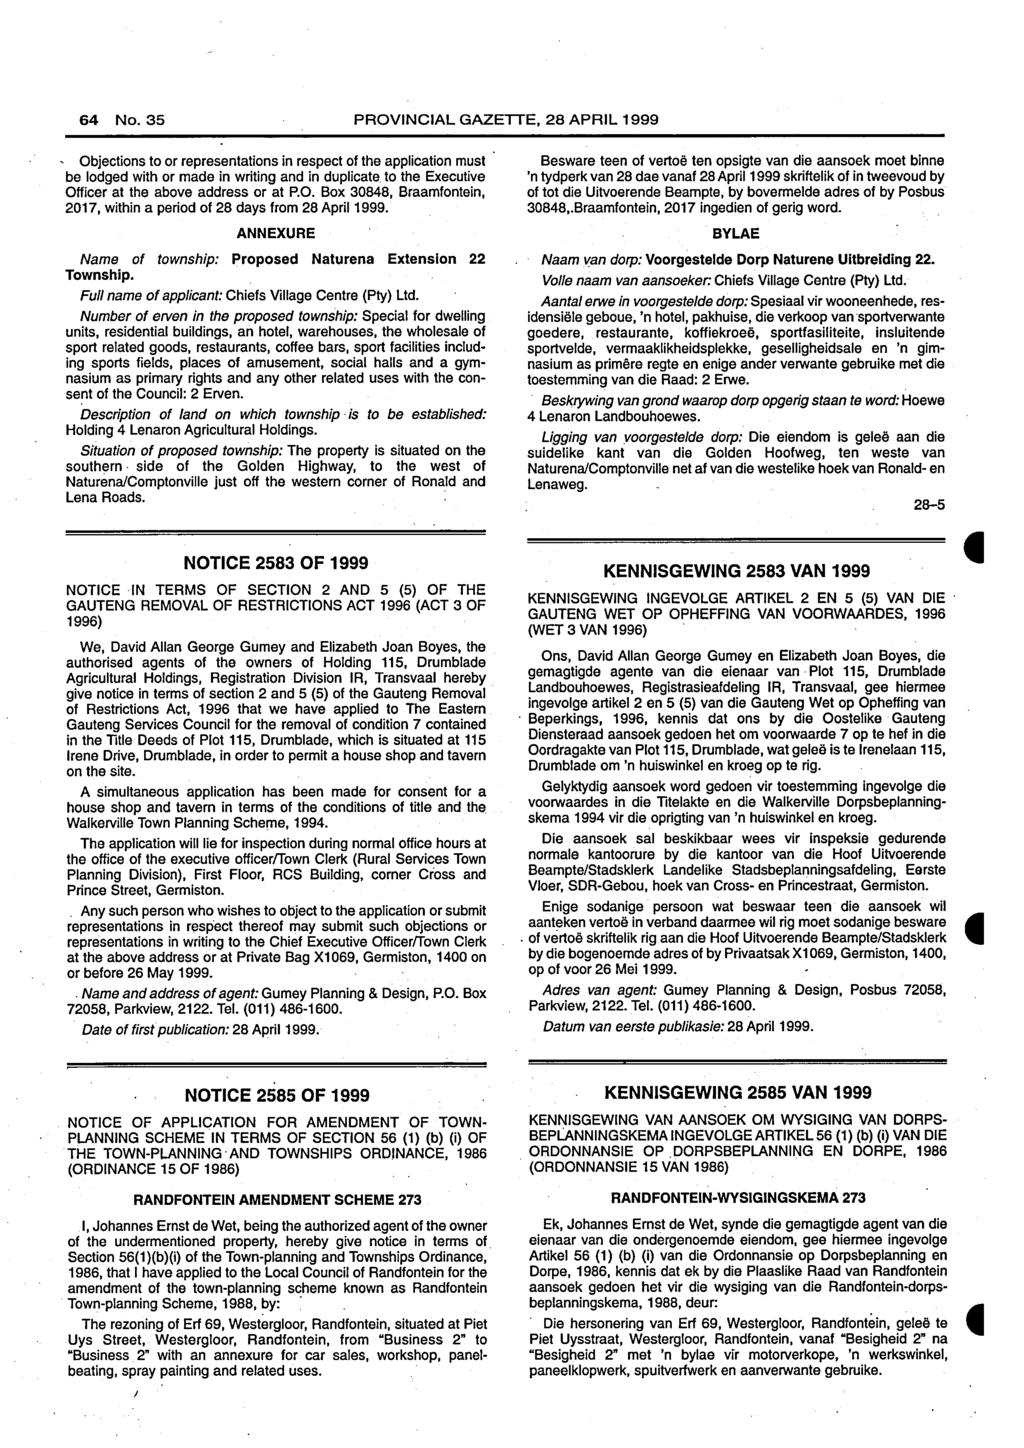 64 No.35 PROVINCIAL GAZETTE, 28 APRIL 1999 be lodged with or made in writing and in duplicate to the Executive Officer at the above address or at P.O. Box 30848, Braamfontein, 2017, within a period of 28 days from 28 April1999.